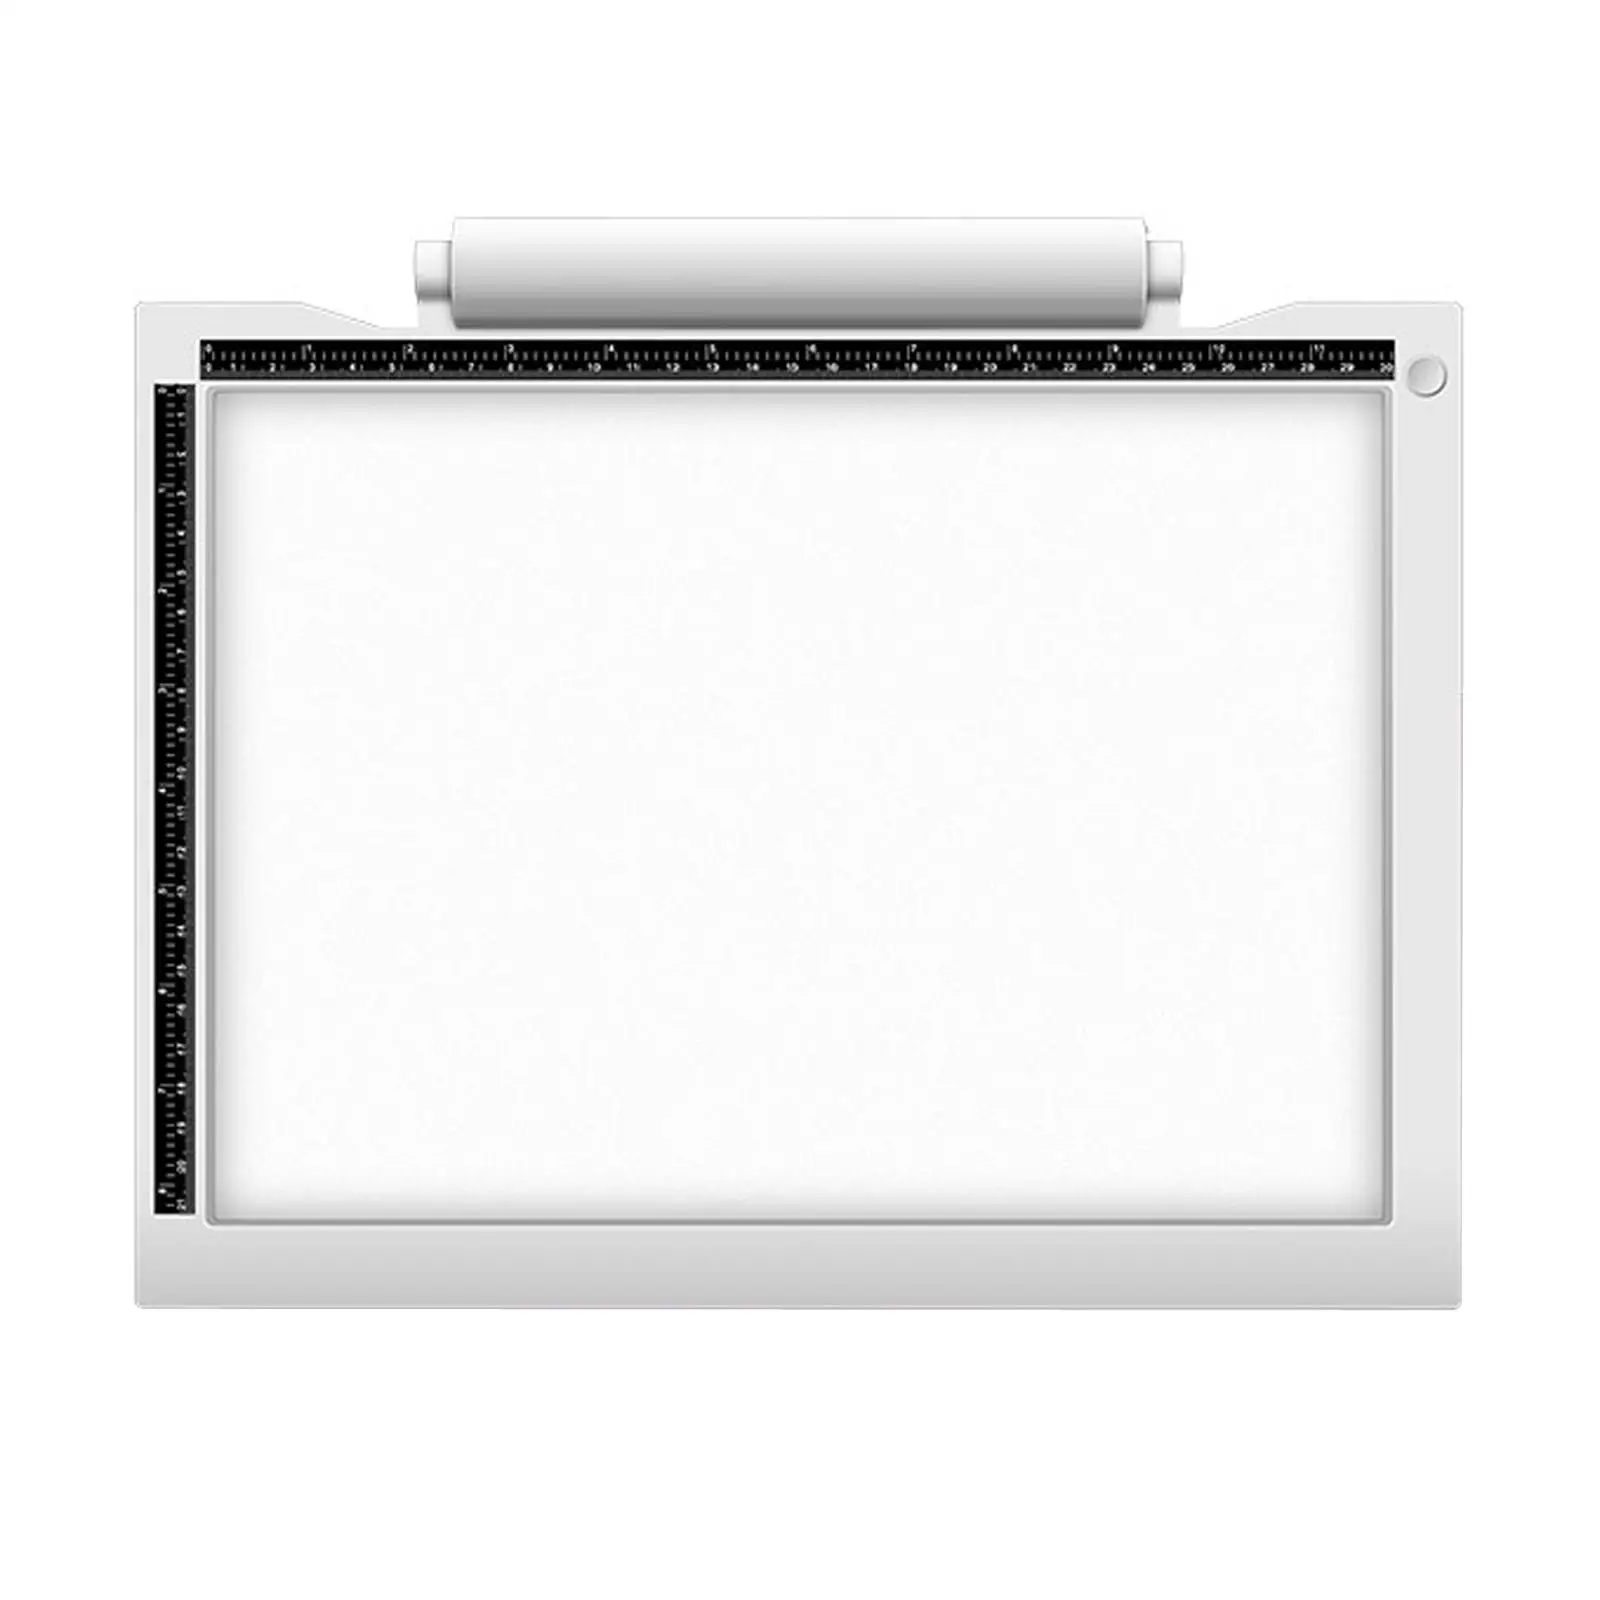 LED Copy Board Multipurpose Tracing Light Box Drawing Pad for Scrapbooking Calligraphy Travel Toy Sewing Projects Birthday Gifts